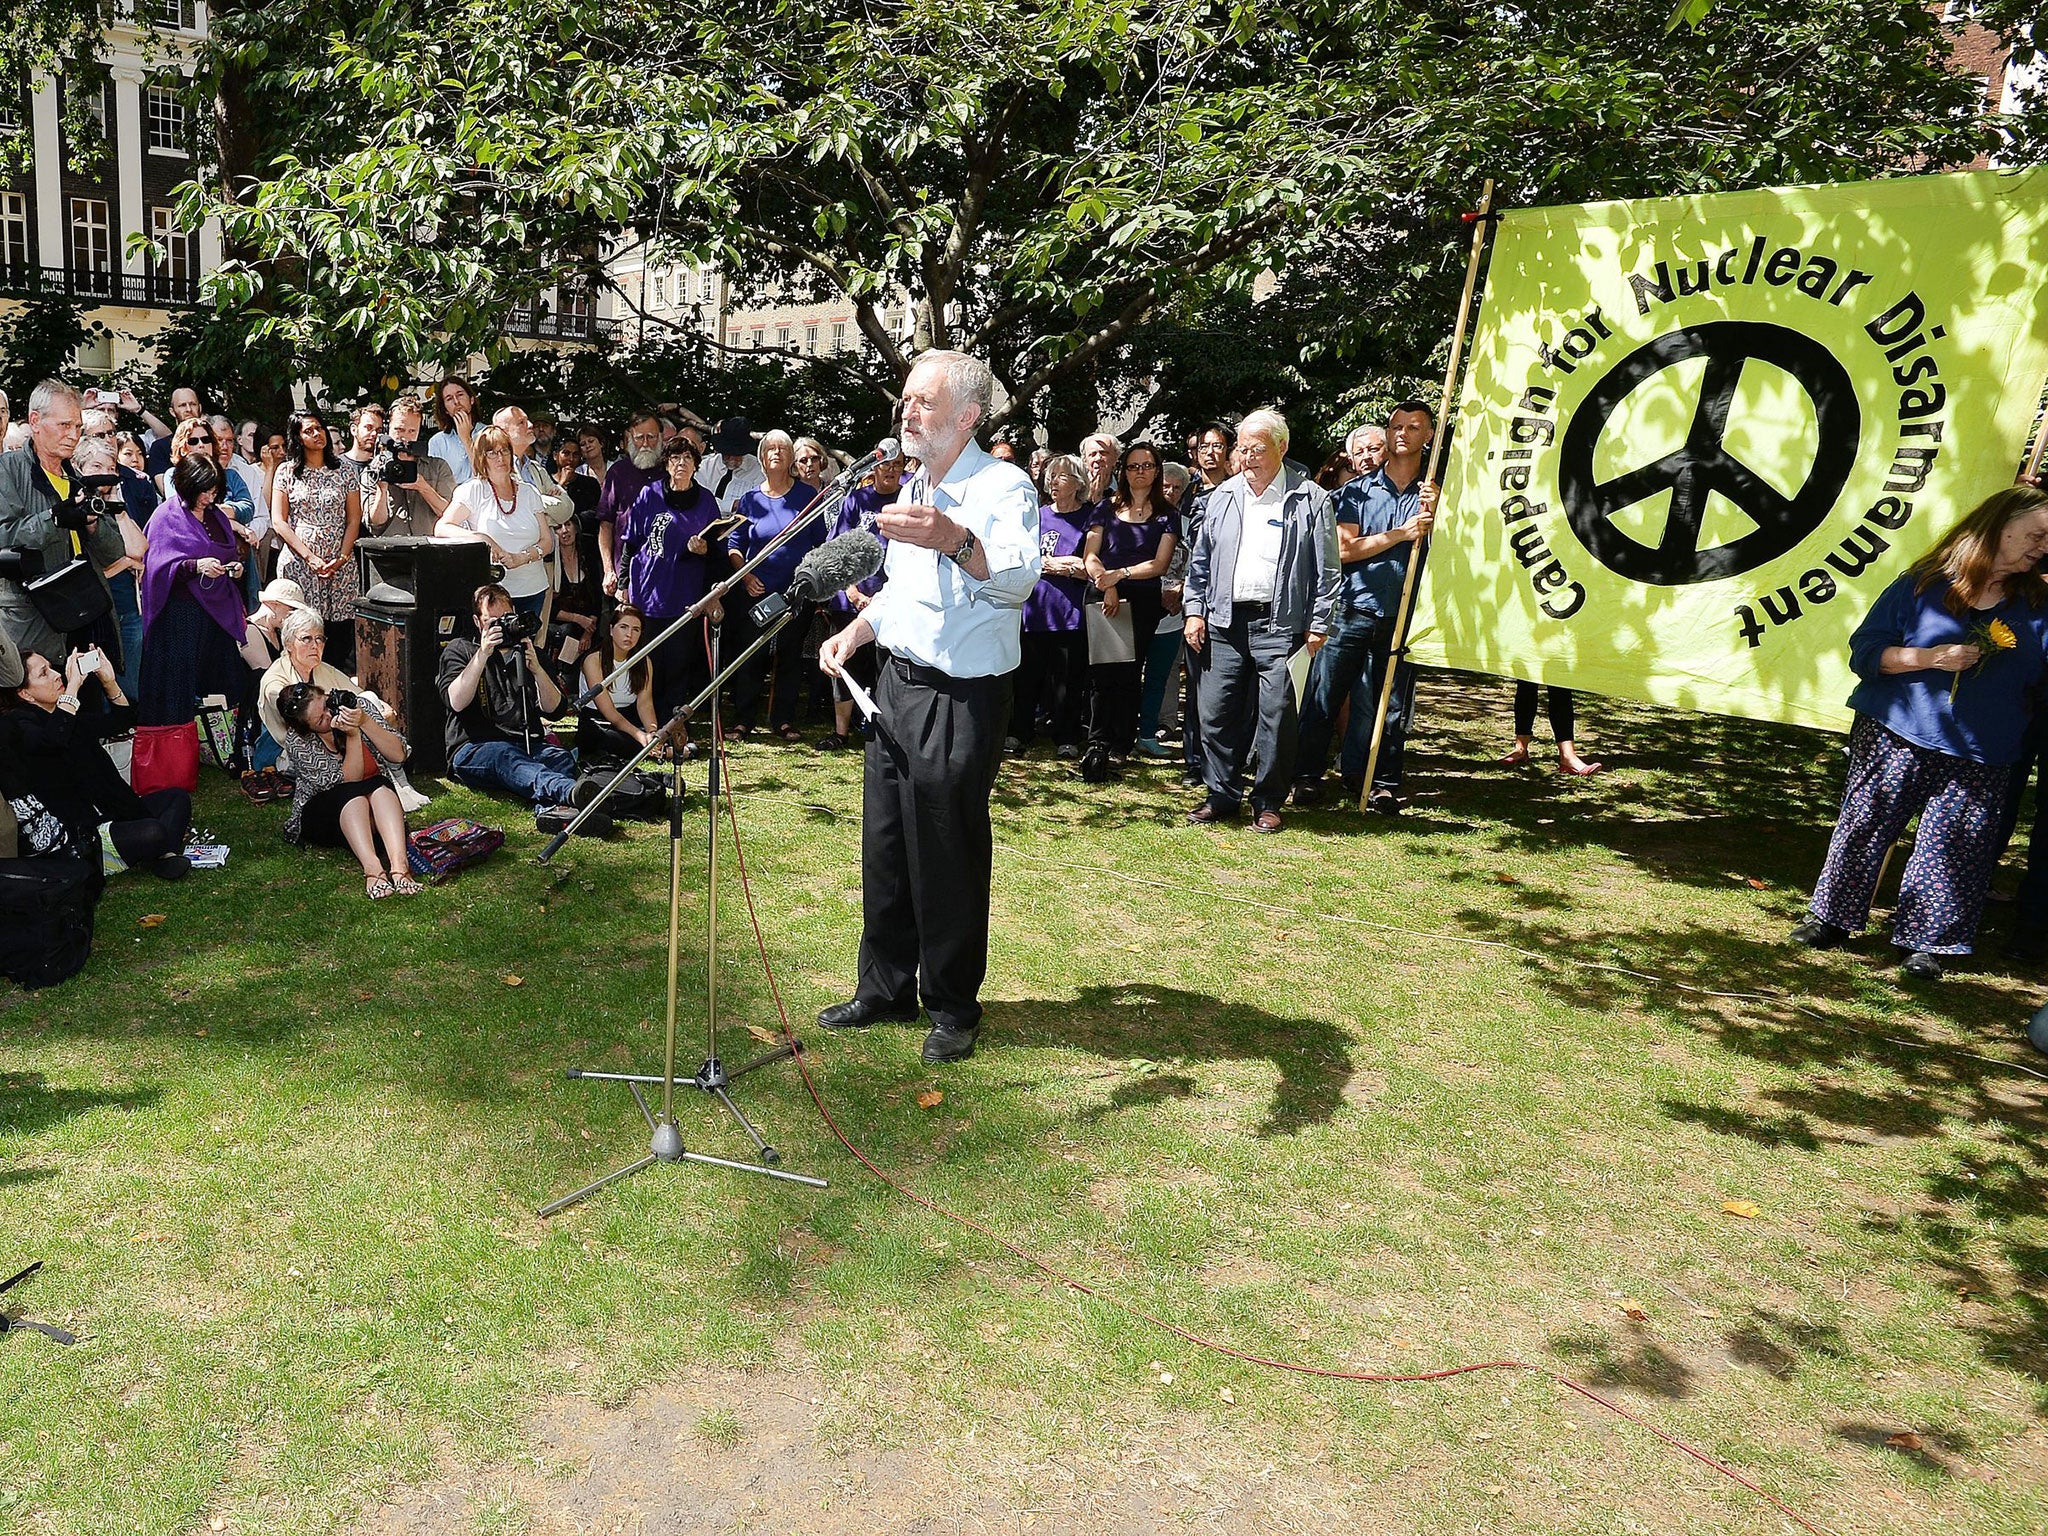 Jeremy Corbyn in London yesterday, at an event marking the 70th anniversary of the Hiroshima bomb